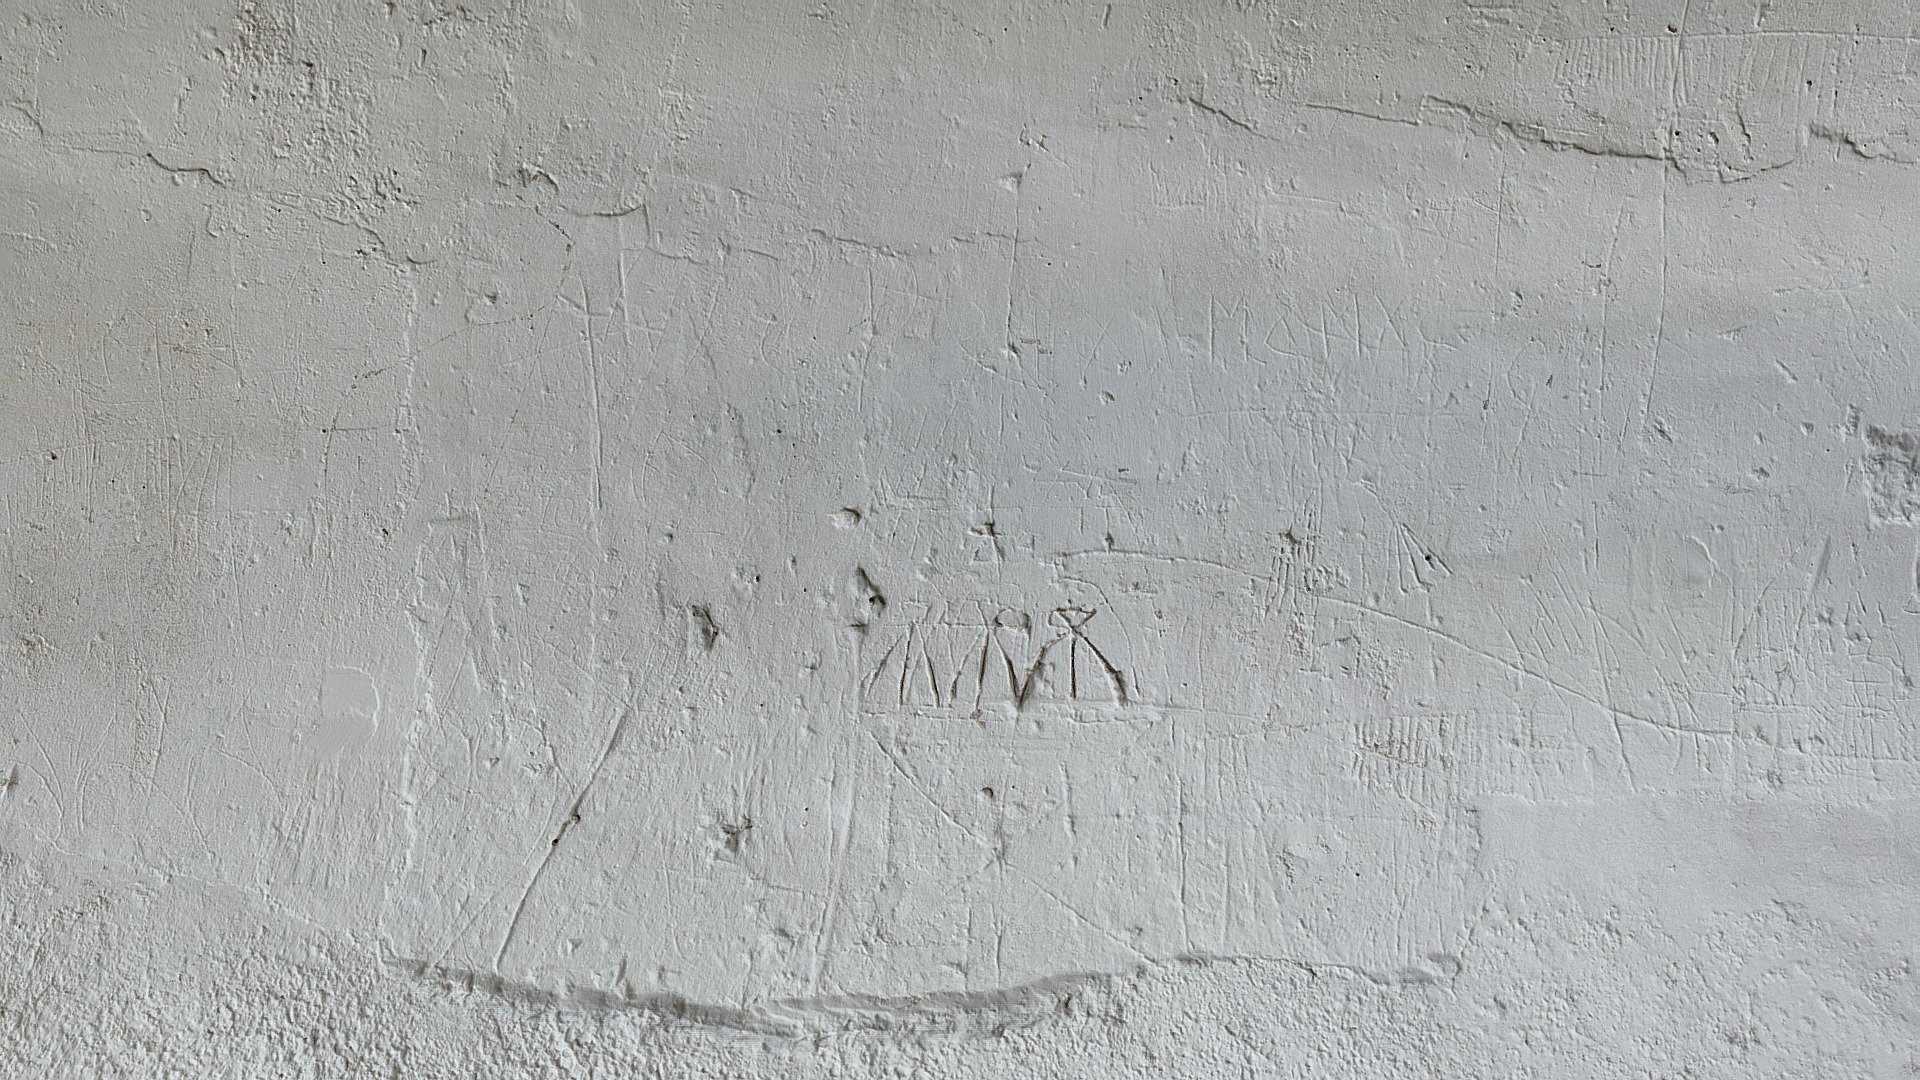 Graffiti in the prison of the town of Picón (2)